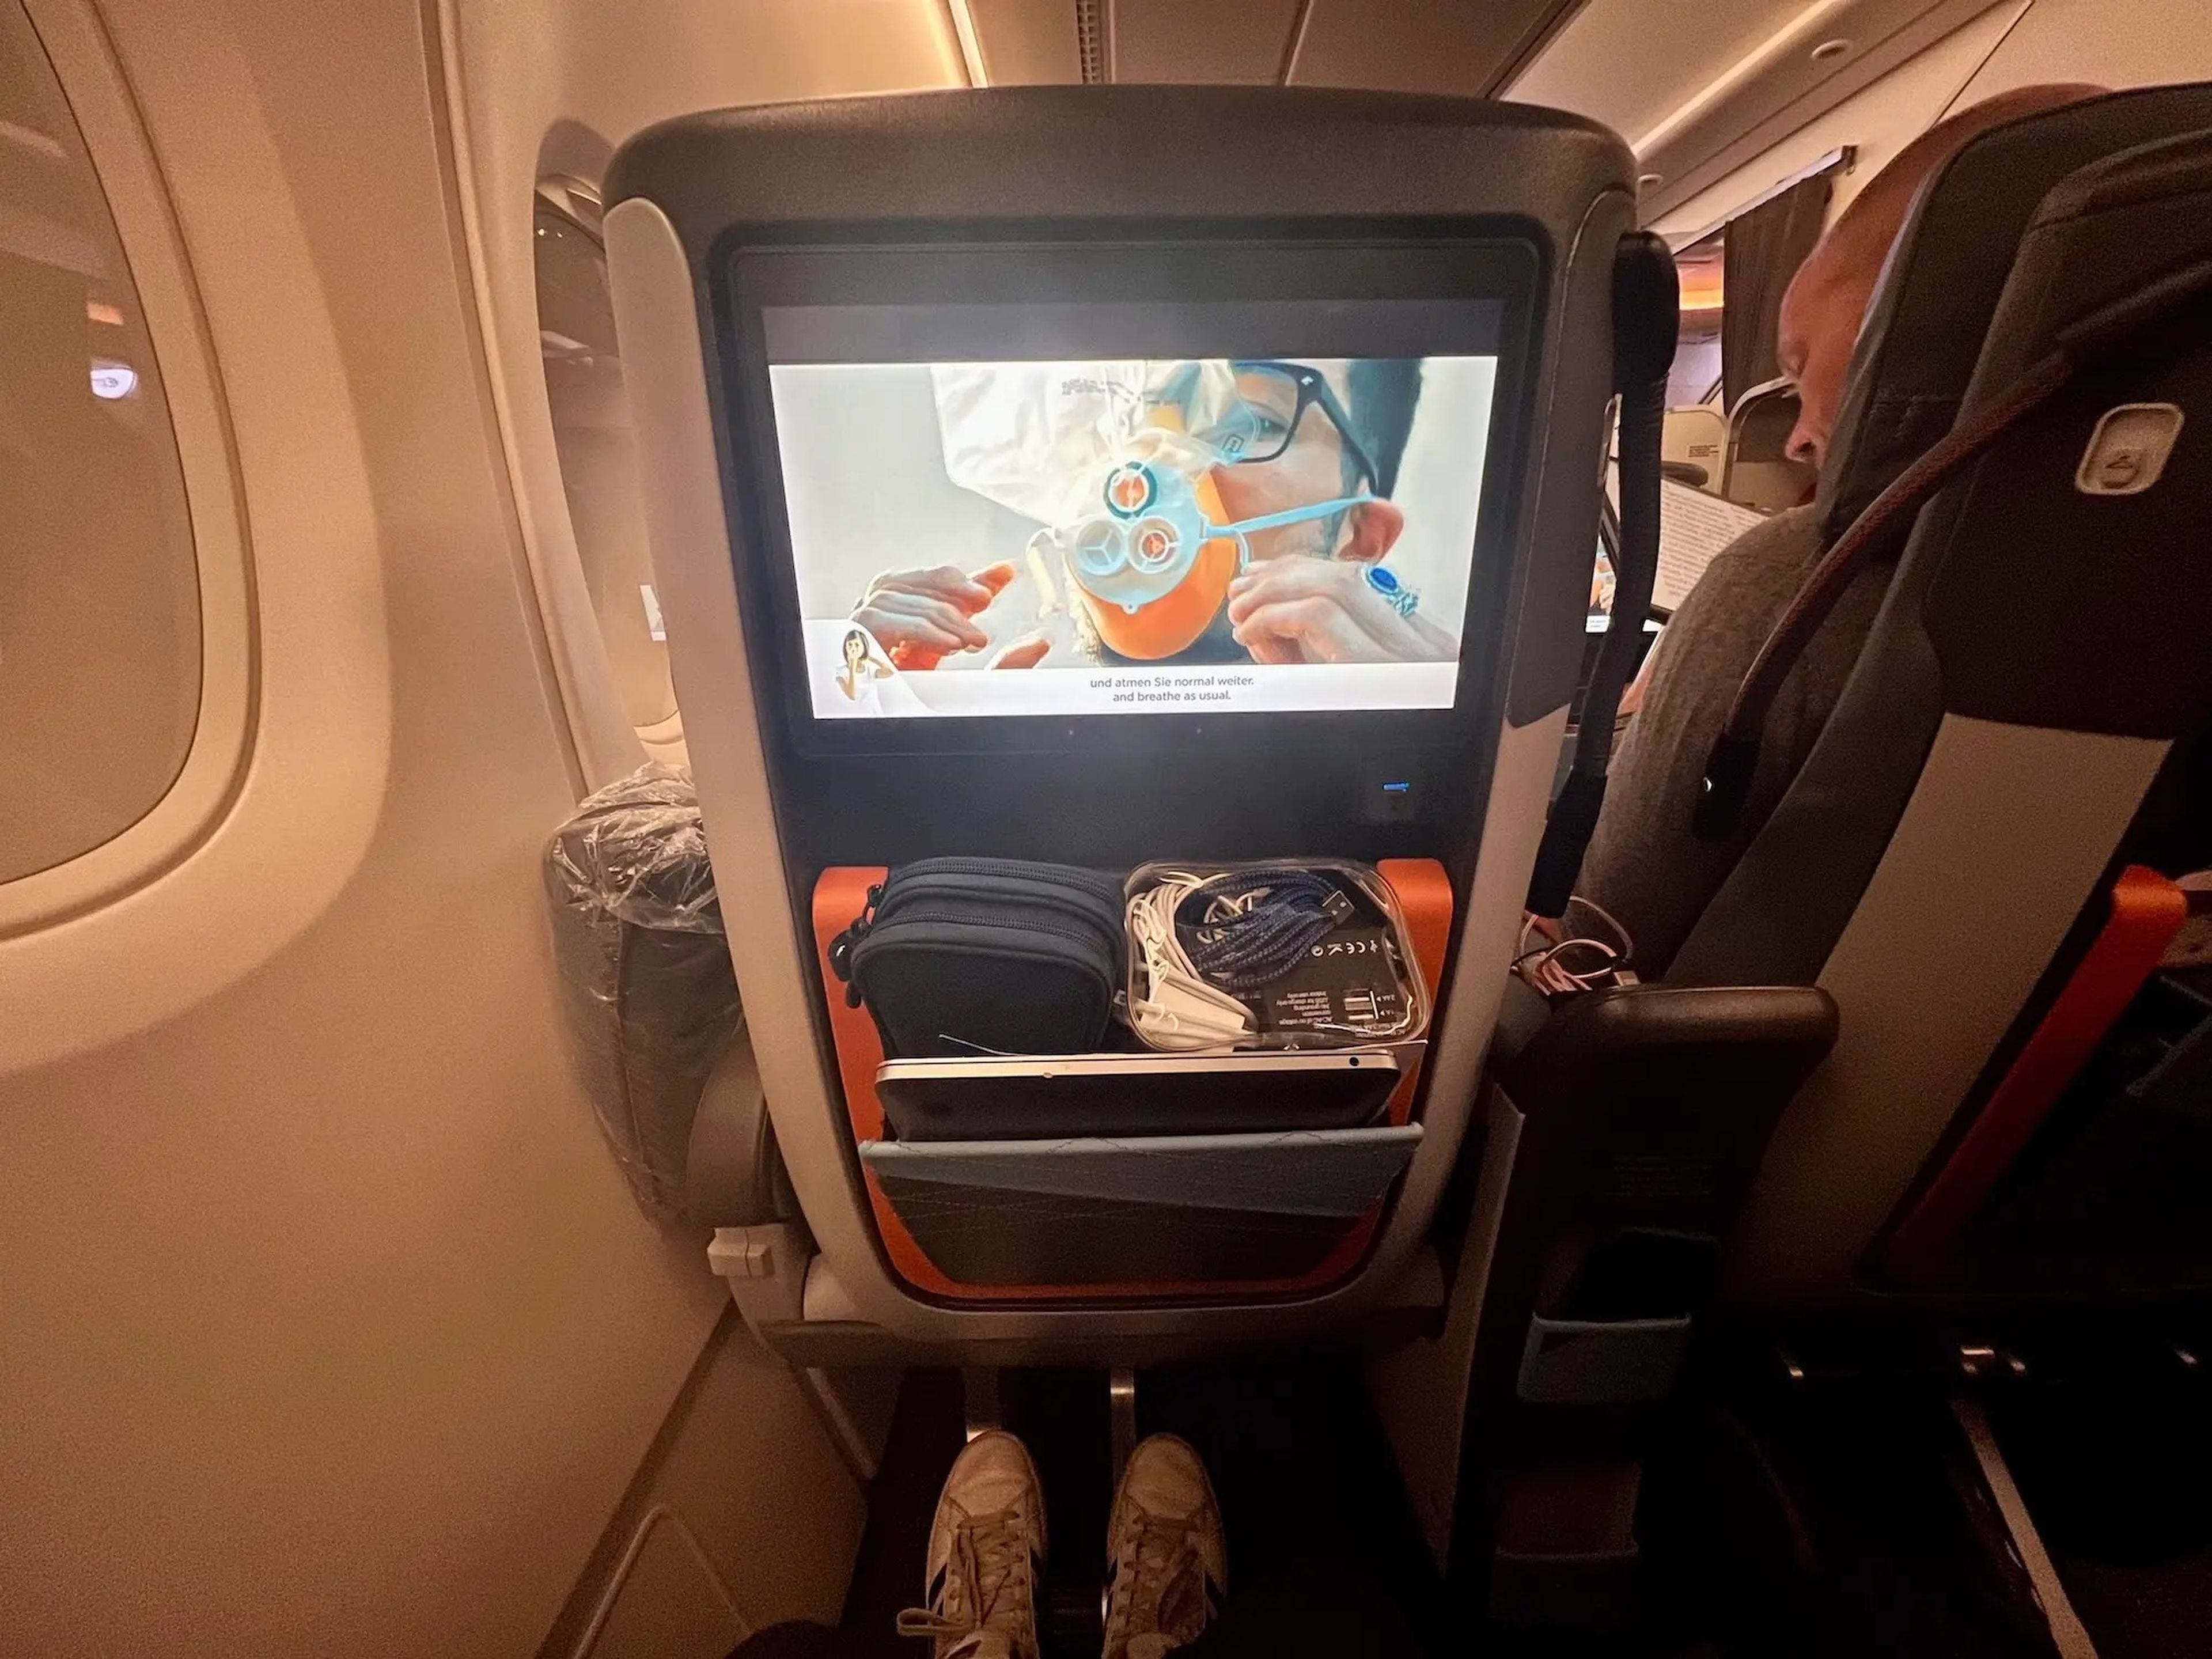 Singapore's pre-flight safety video with sign language in the bottom left corner.